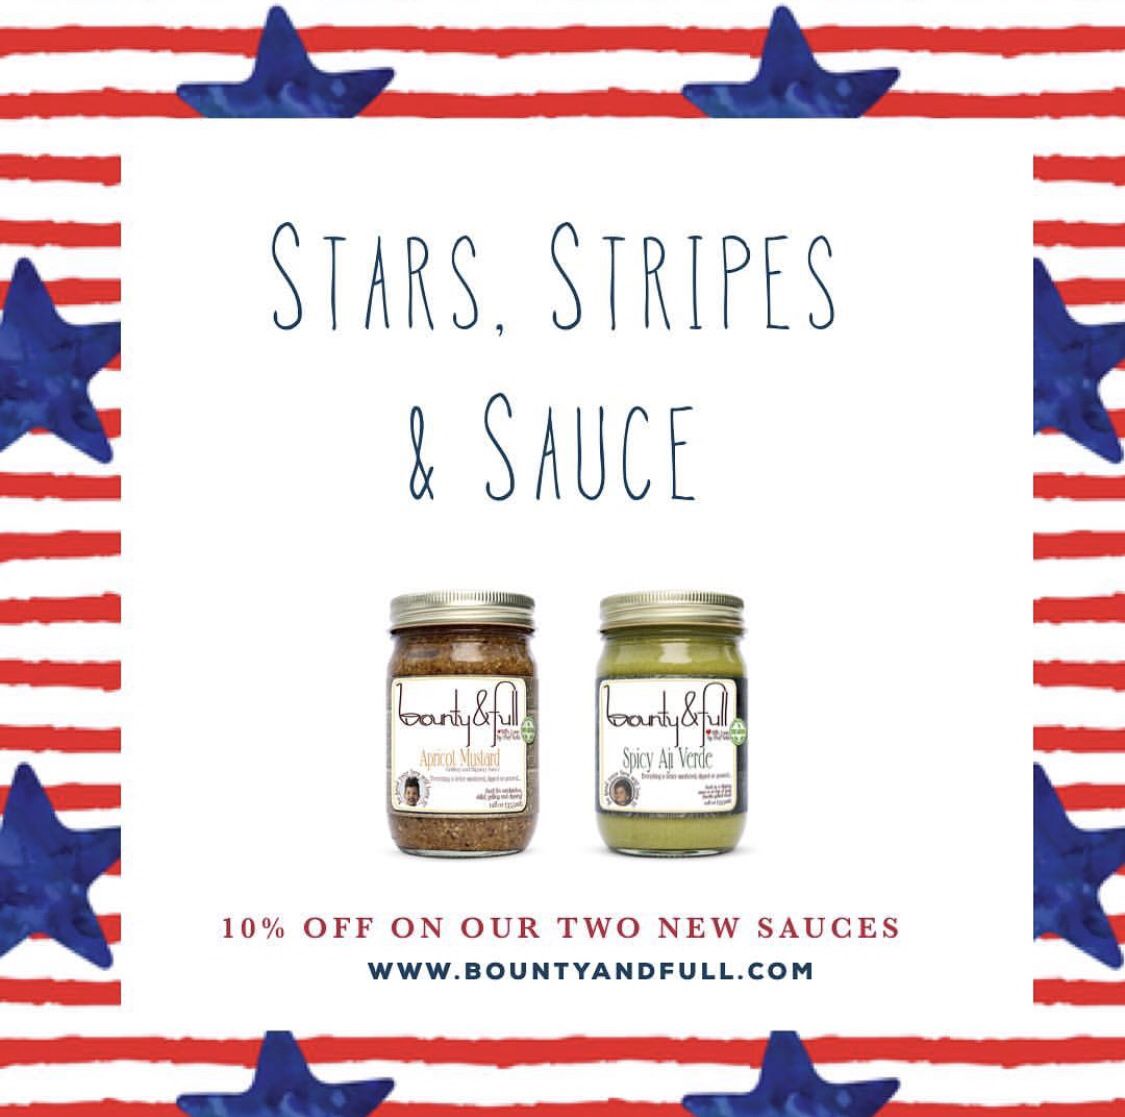 Labor Day’s right around the corner, have you tried our new sauces? https://t.co/xOfe3KJ5Gf - use code 10OFF https://t.co/R9LcjvqXrZ